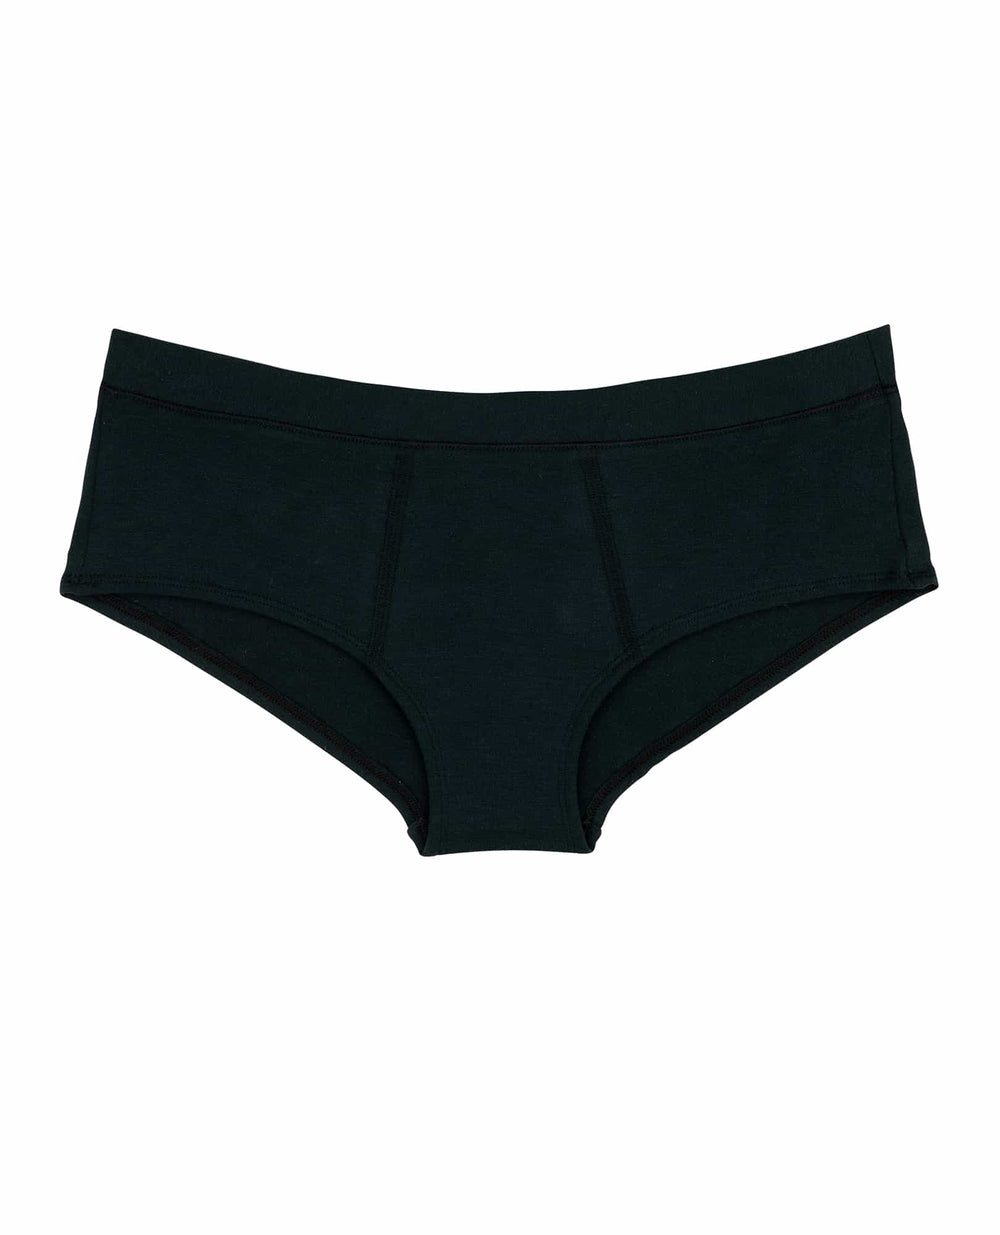 Women's Active Odor Control Low Rise Hipster Panty